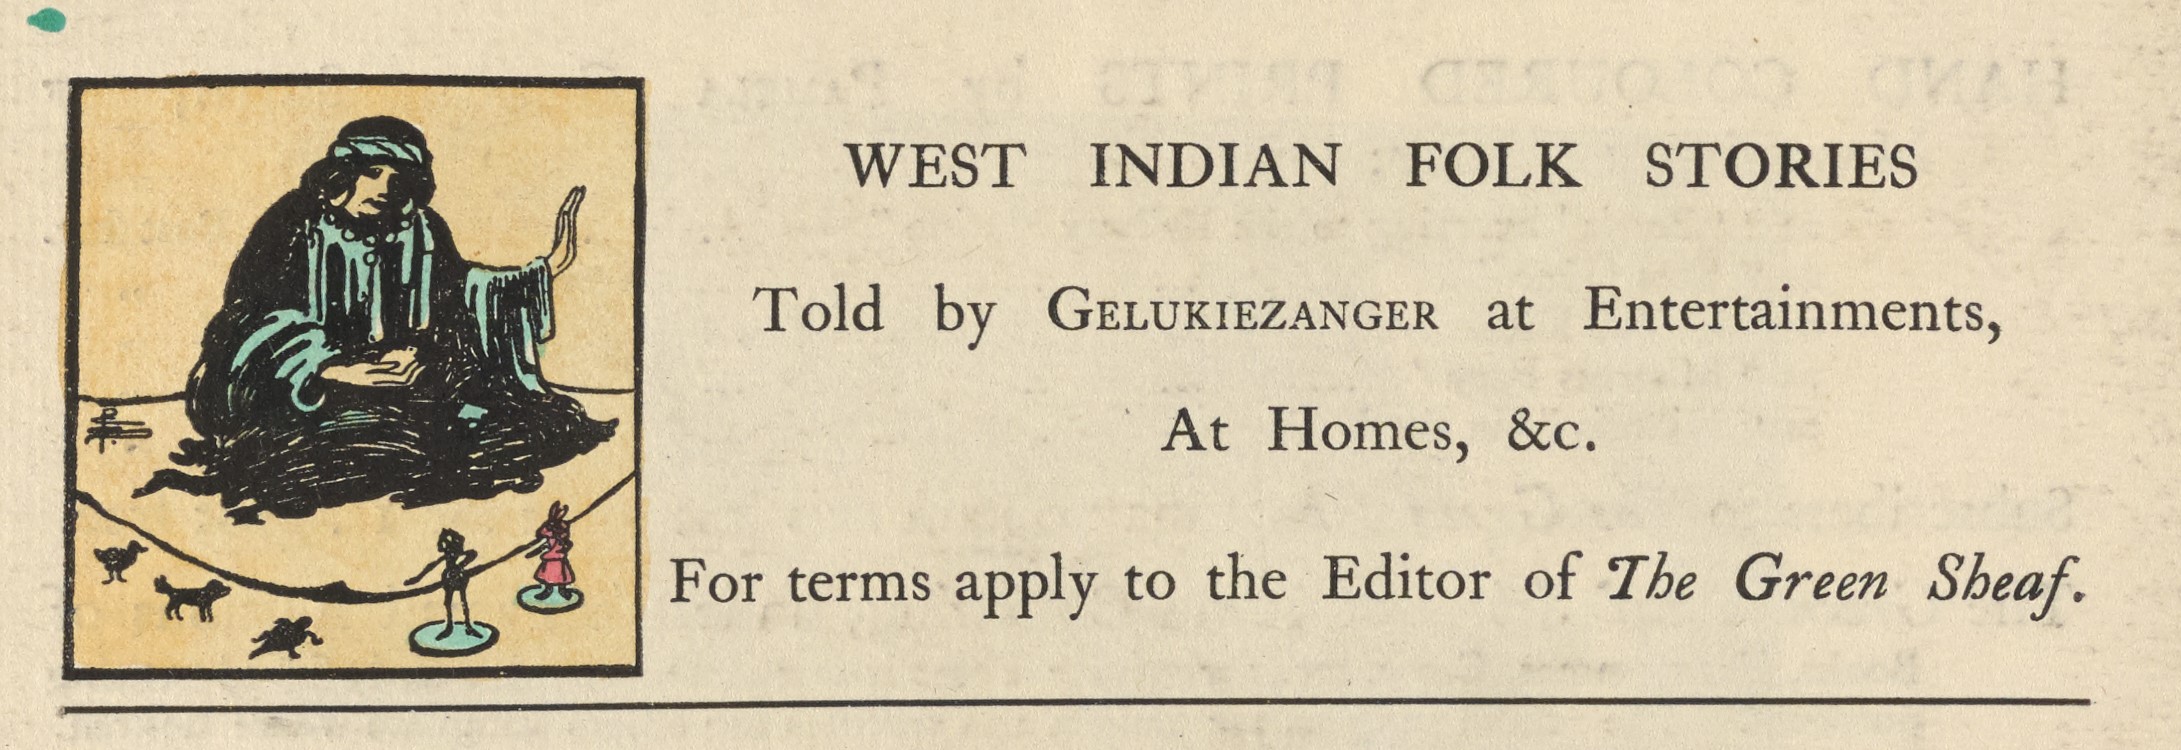 The illustrated advertisement occupies the top third of the page of advertisements. The ad is titled “West Indian Folk Stories,” in a large serif font. Below the title is printed, “Told by GELUKIEZANGER at Entertainments, / At Homes, &c., / For terms apply to the Editor of The Green Sheaf.” To the left of the text is a small, coloured illustration with a black rectangular frame. It depicts a woman wearing green robes, a green headband, hoop earrings, and a necklace, sitting cross-legged on the floor telling a story. She sits atop a blanket, and in front of the blanket are several small puppets or wooden figures.